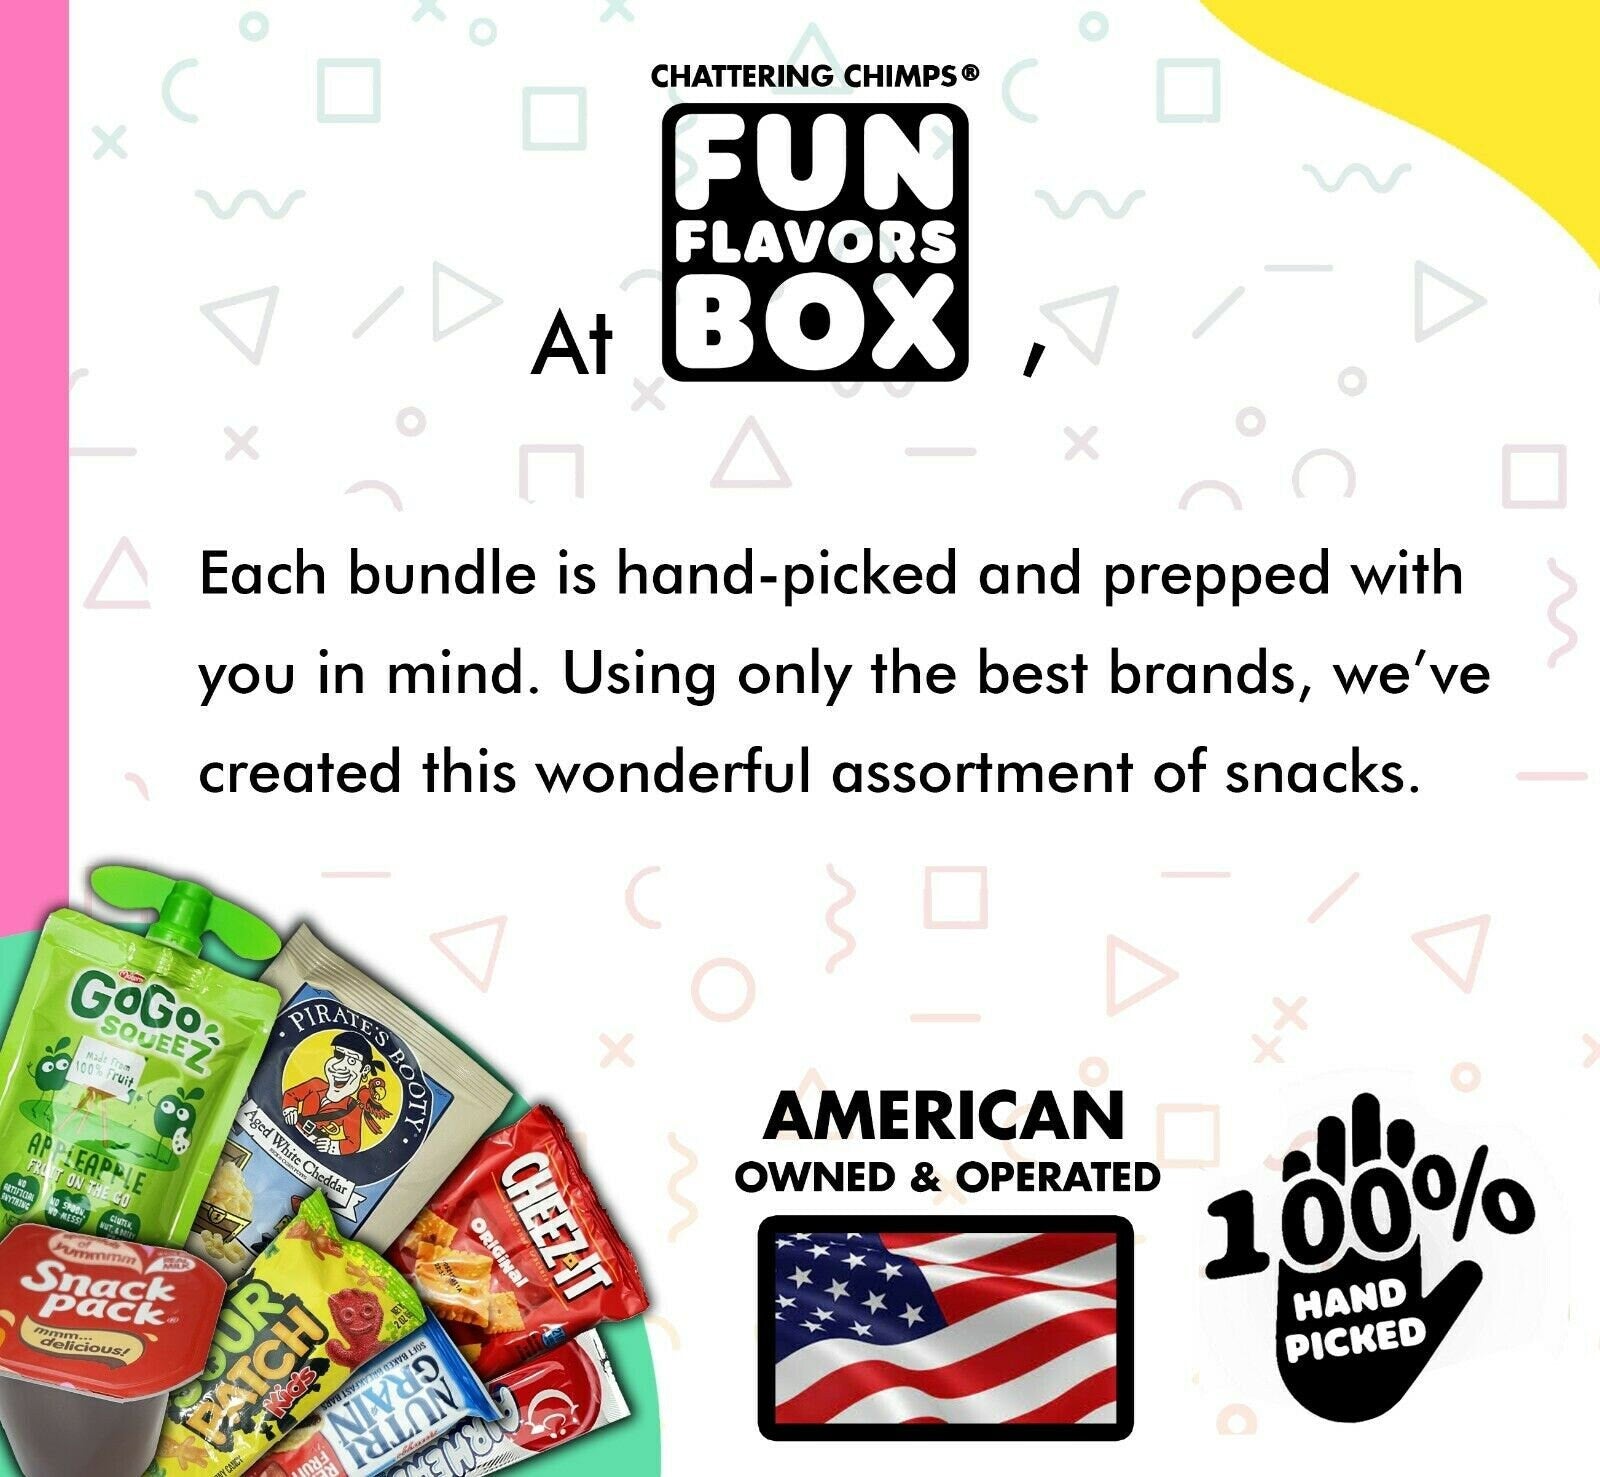 Each Flun Flavors Box snack candy bundle is hand-picked and prepped   American owned and operated.